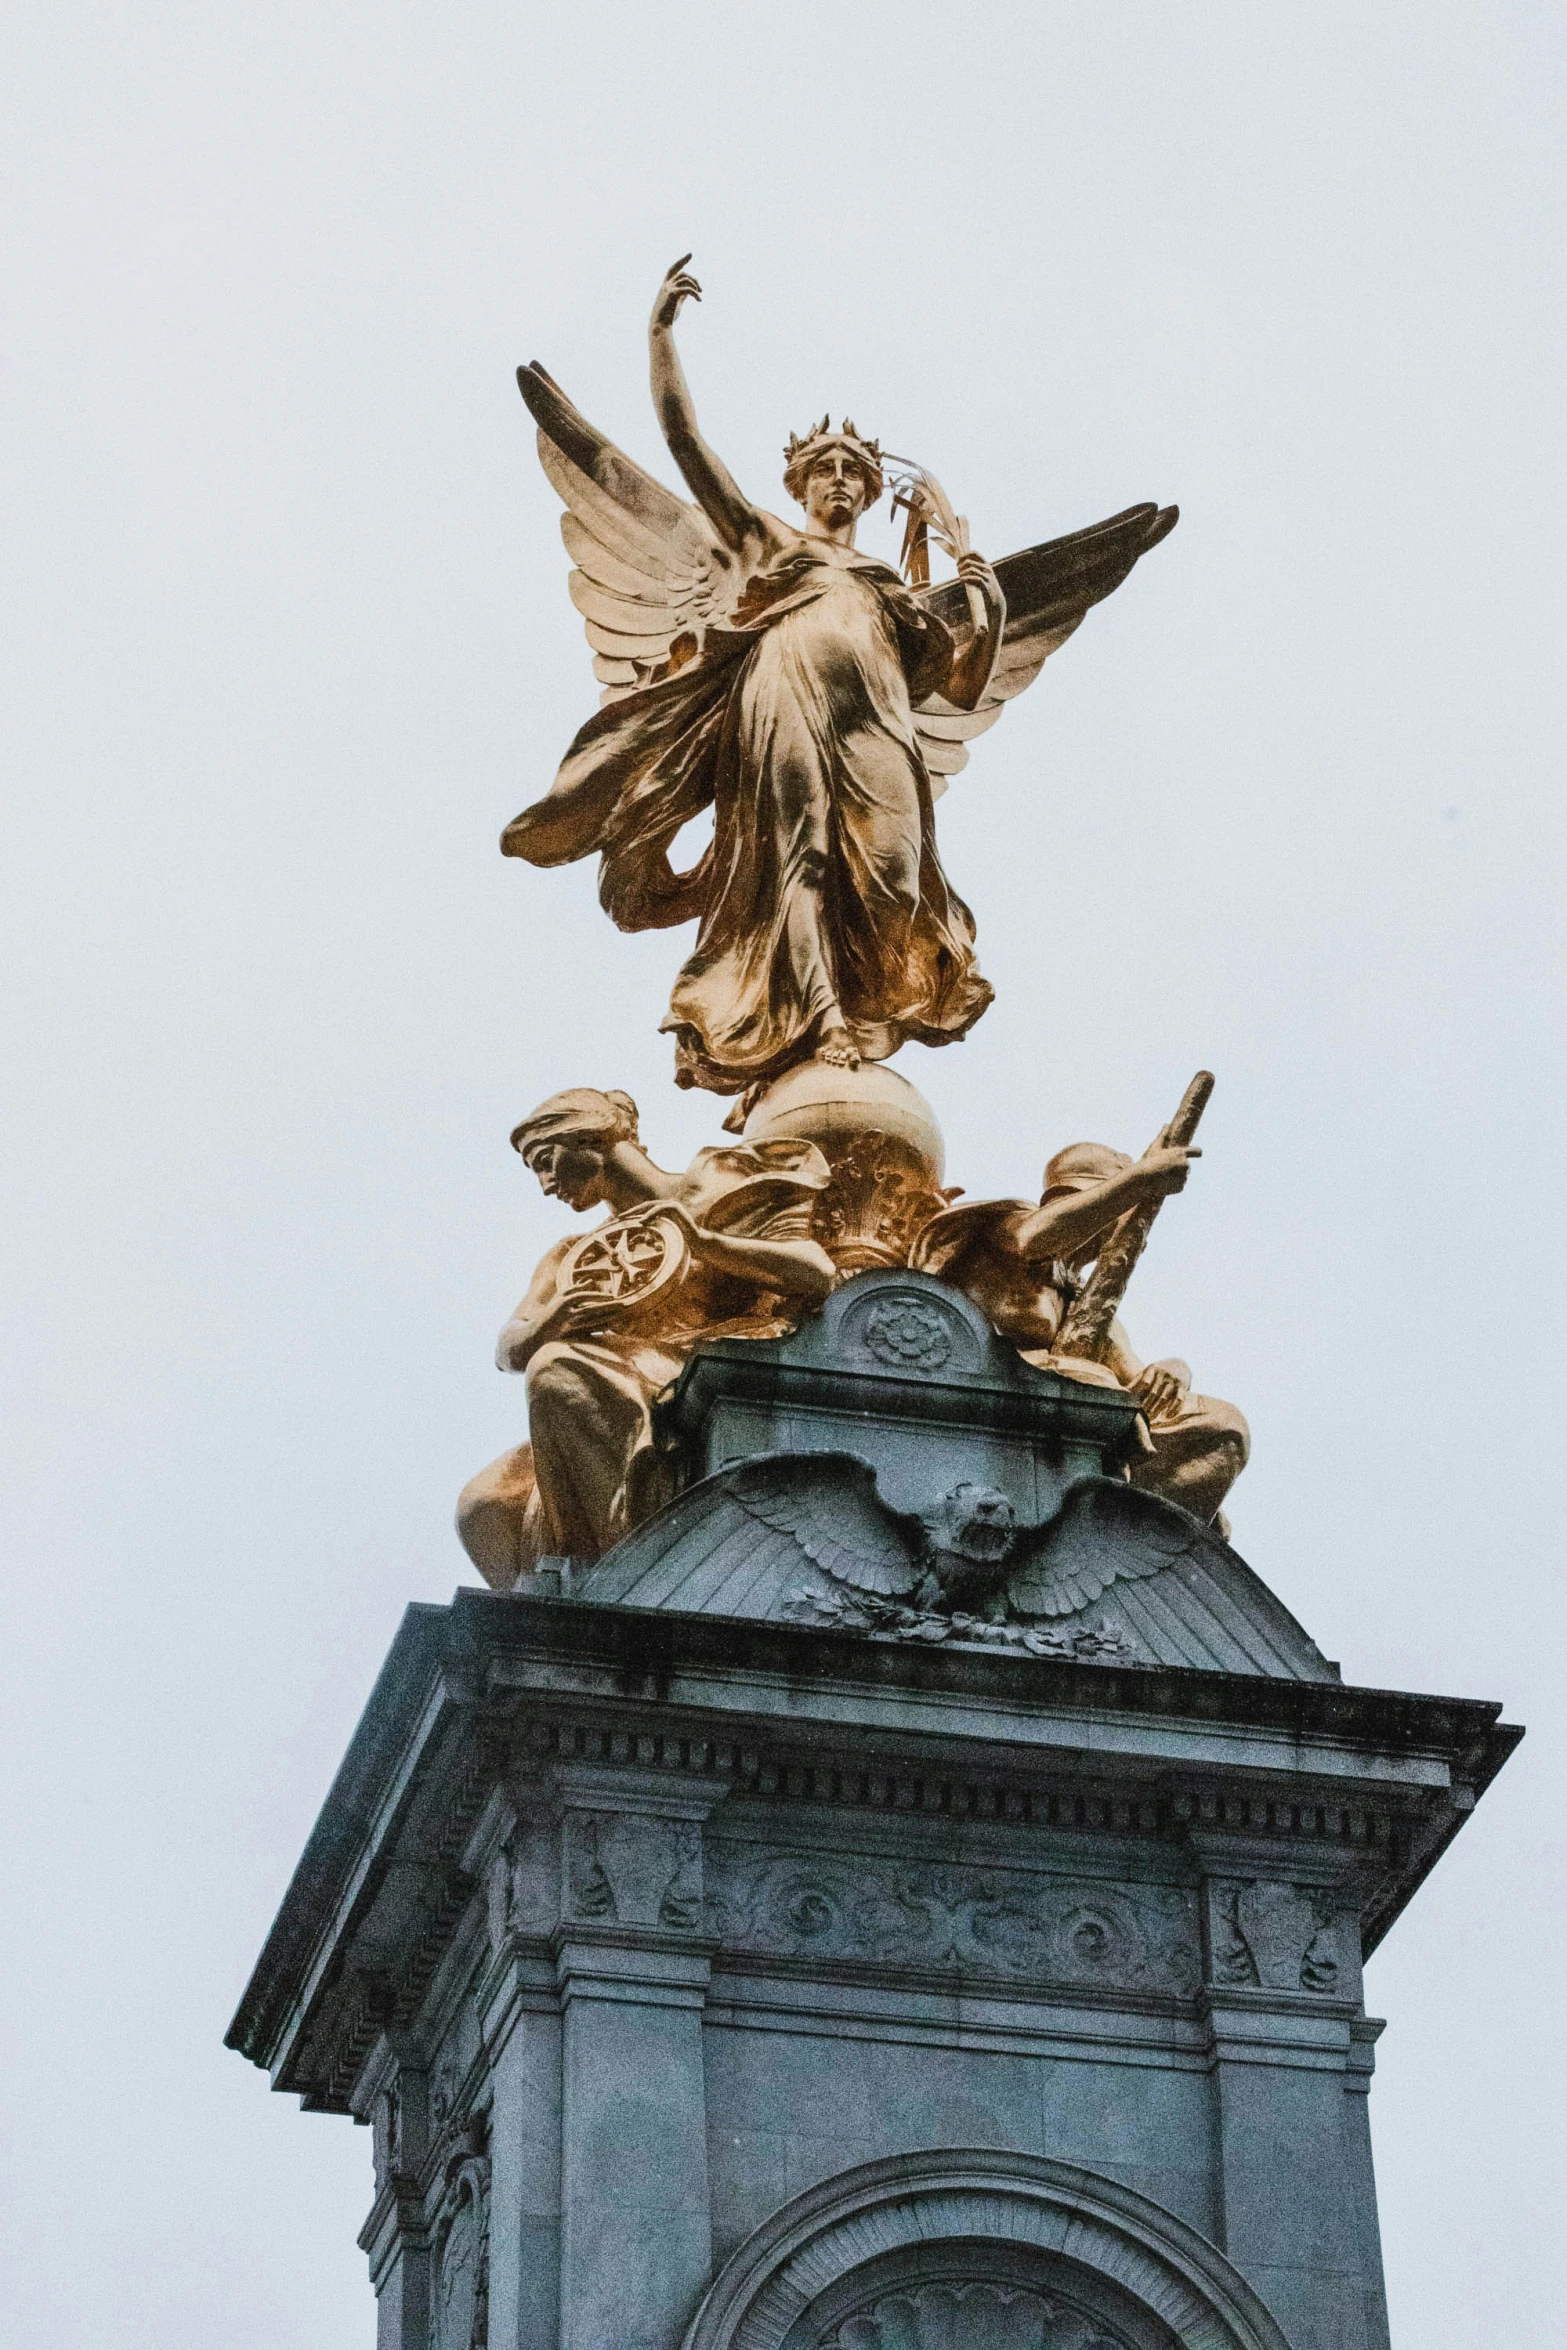 an old statue atop a clock tower that shows an angel on top